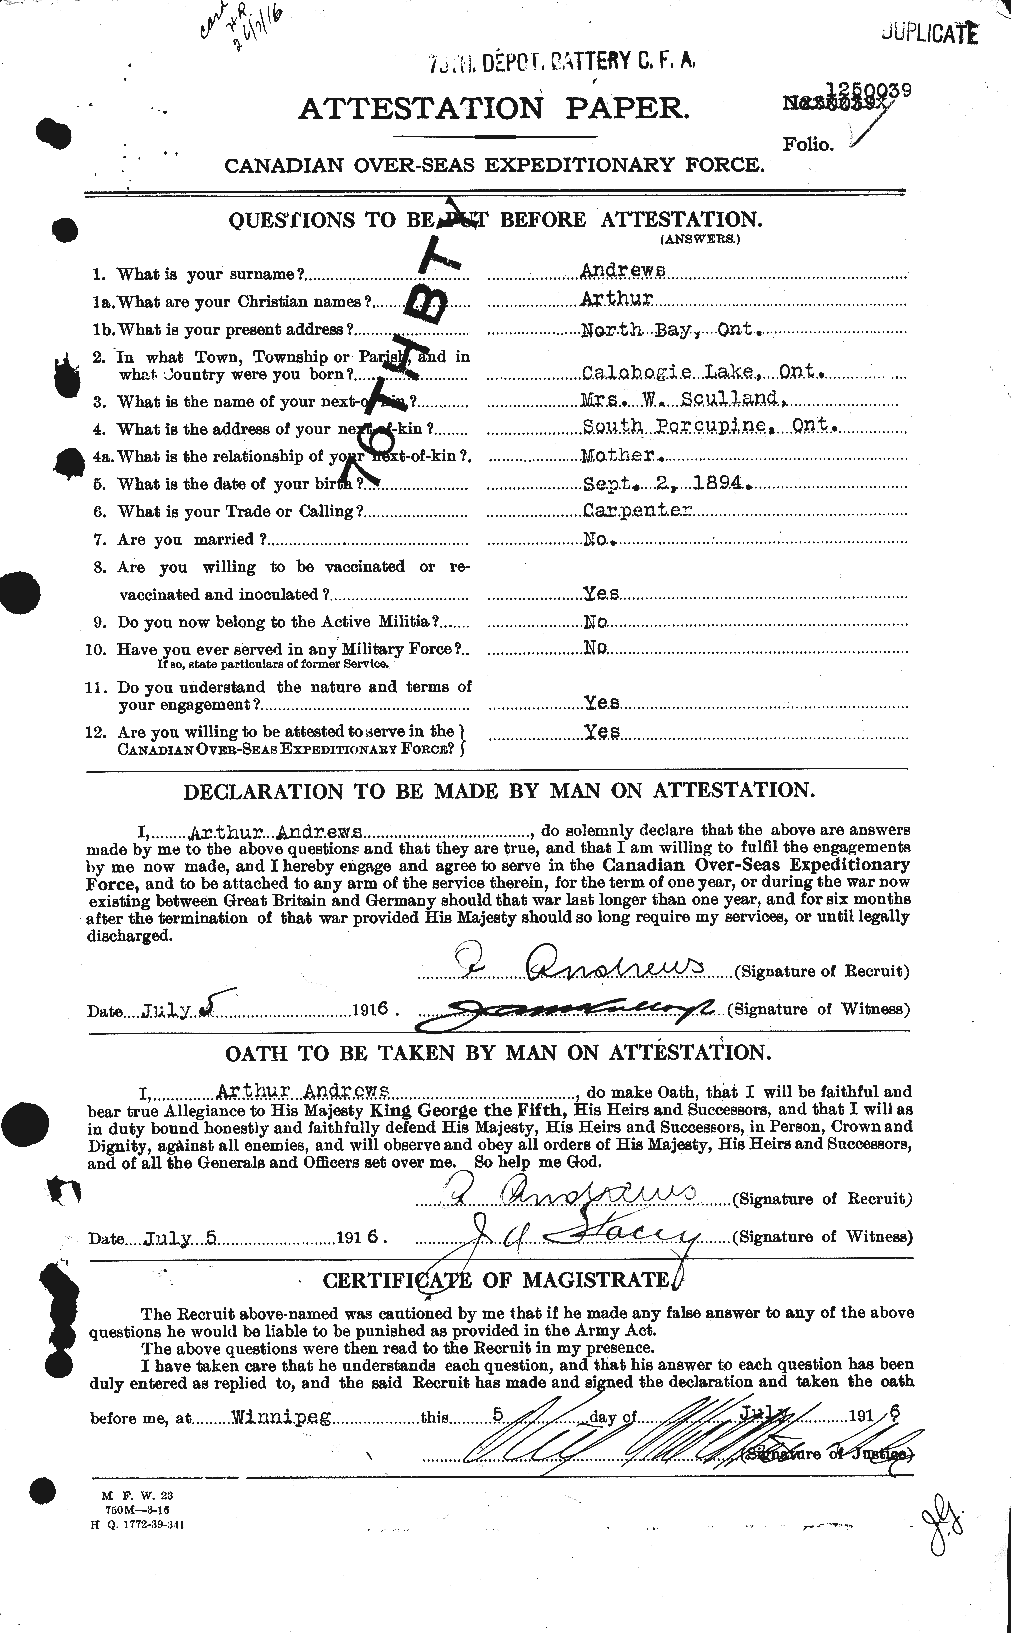 Personnel Records of the First World War - CEF 210434a